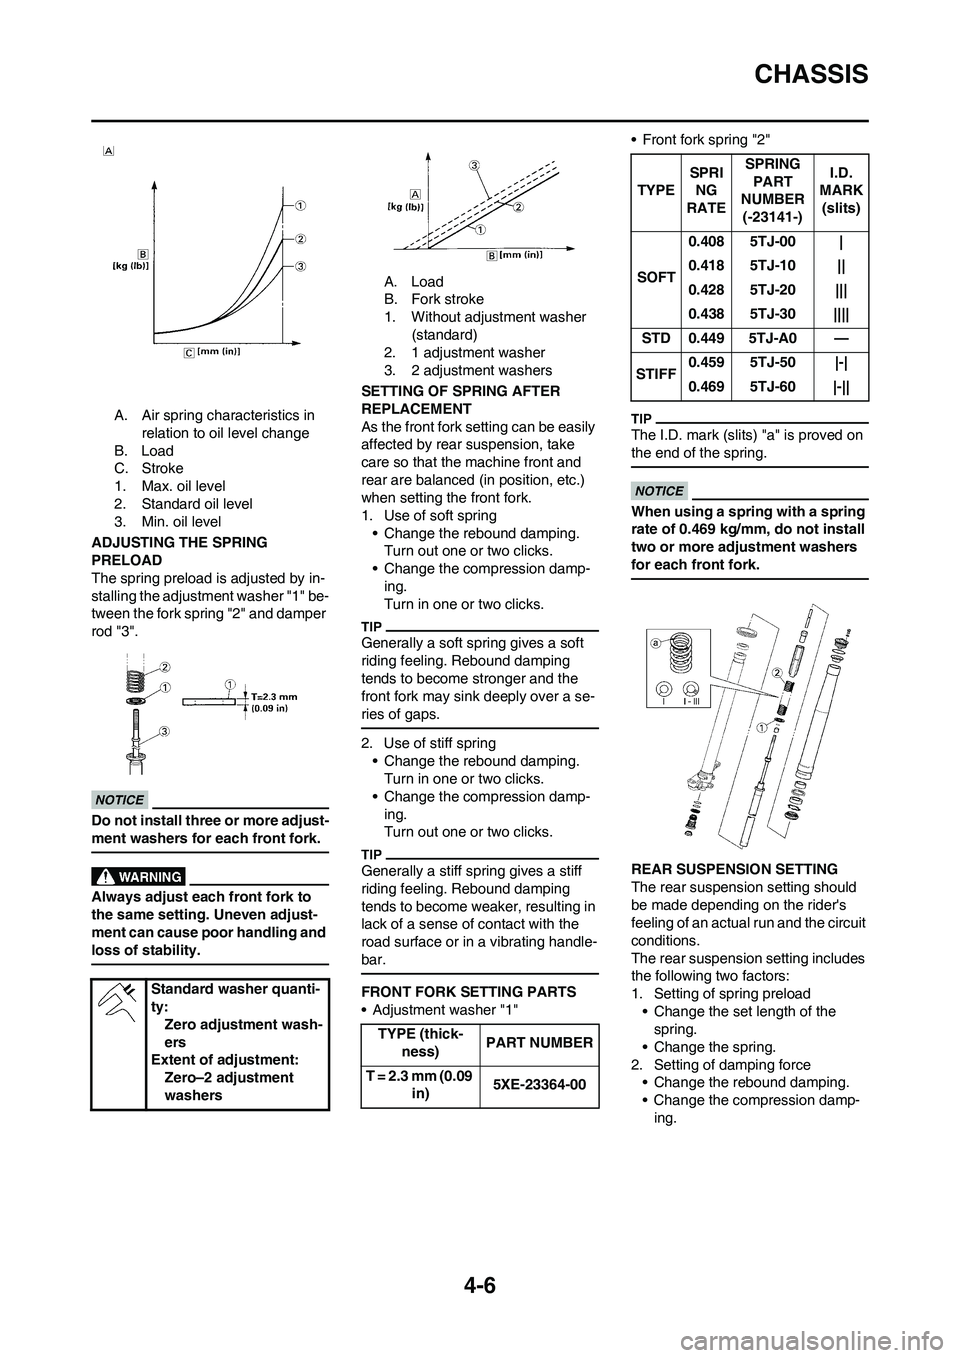 YAMAHA WR 250F 2011  Owners Manual 
4-6
CHASSIS
A. Air spring characteristics in relation to oil level change
B. Load
C. Stroke
1. Max. oil level
2. Standard oil level
3. Min. oil level
ADJUSTING THE SPRING 
PRELOAD
The spring preload 